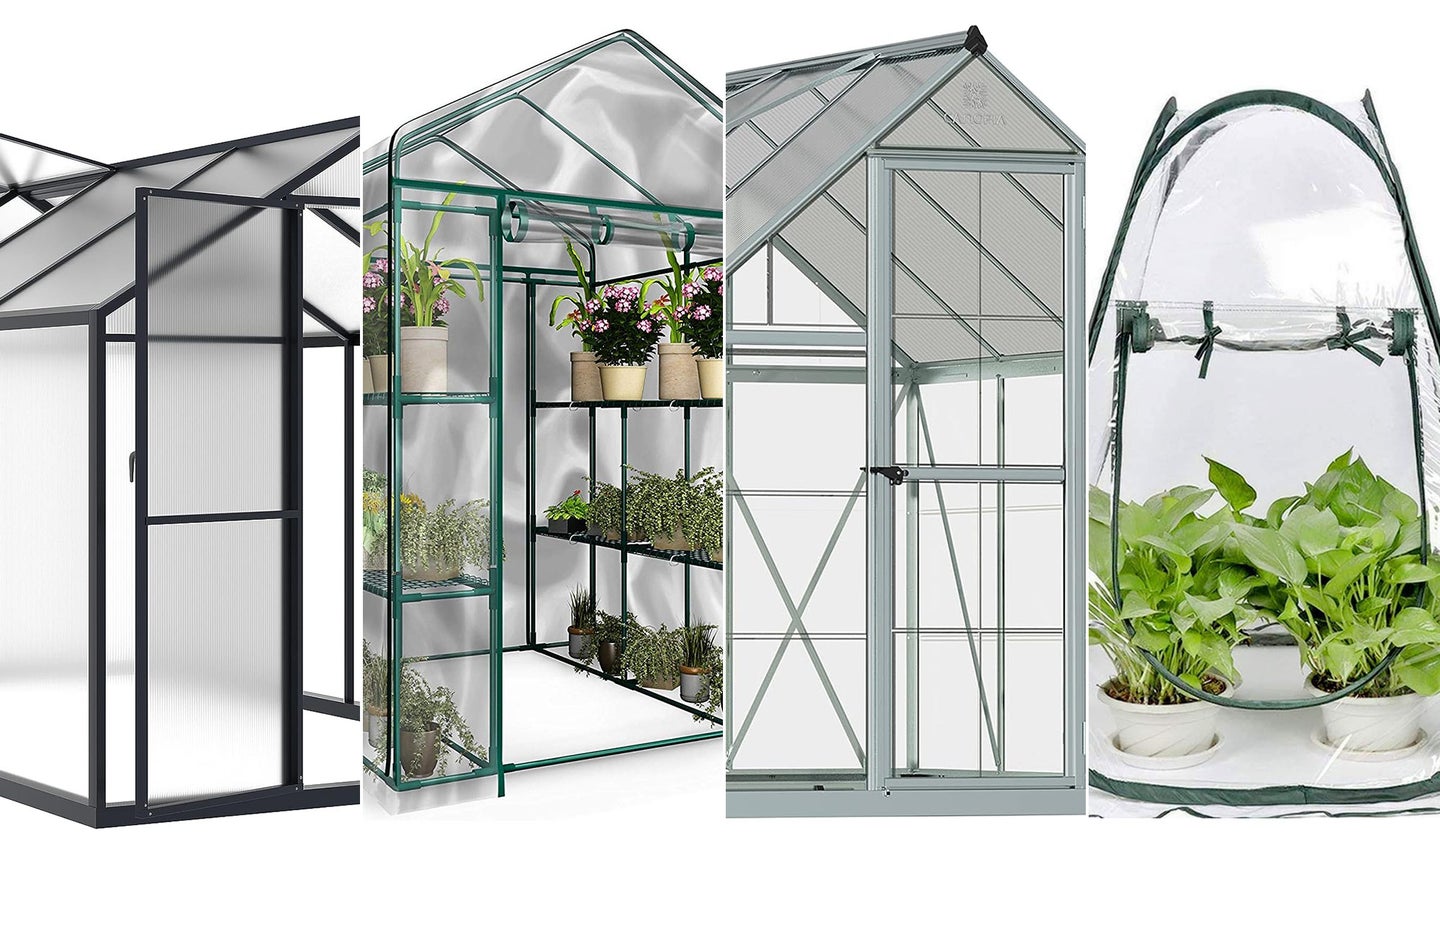 The best greenhouses composited